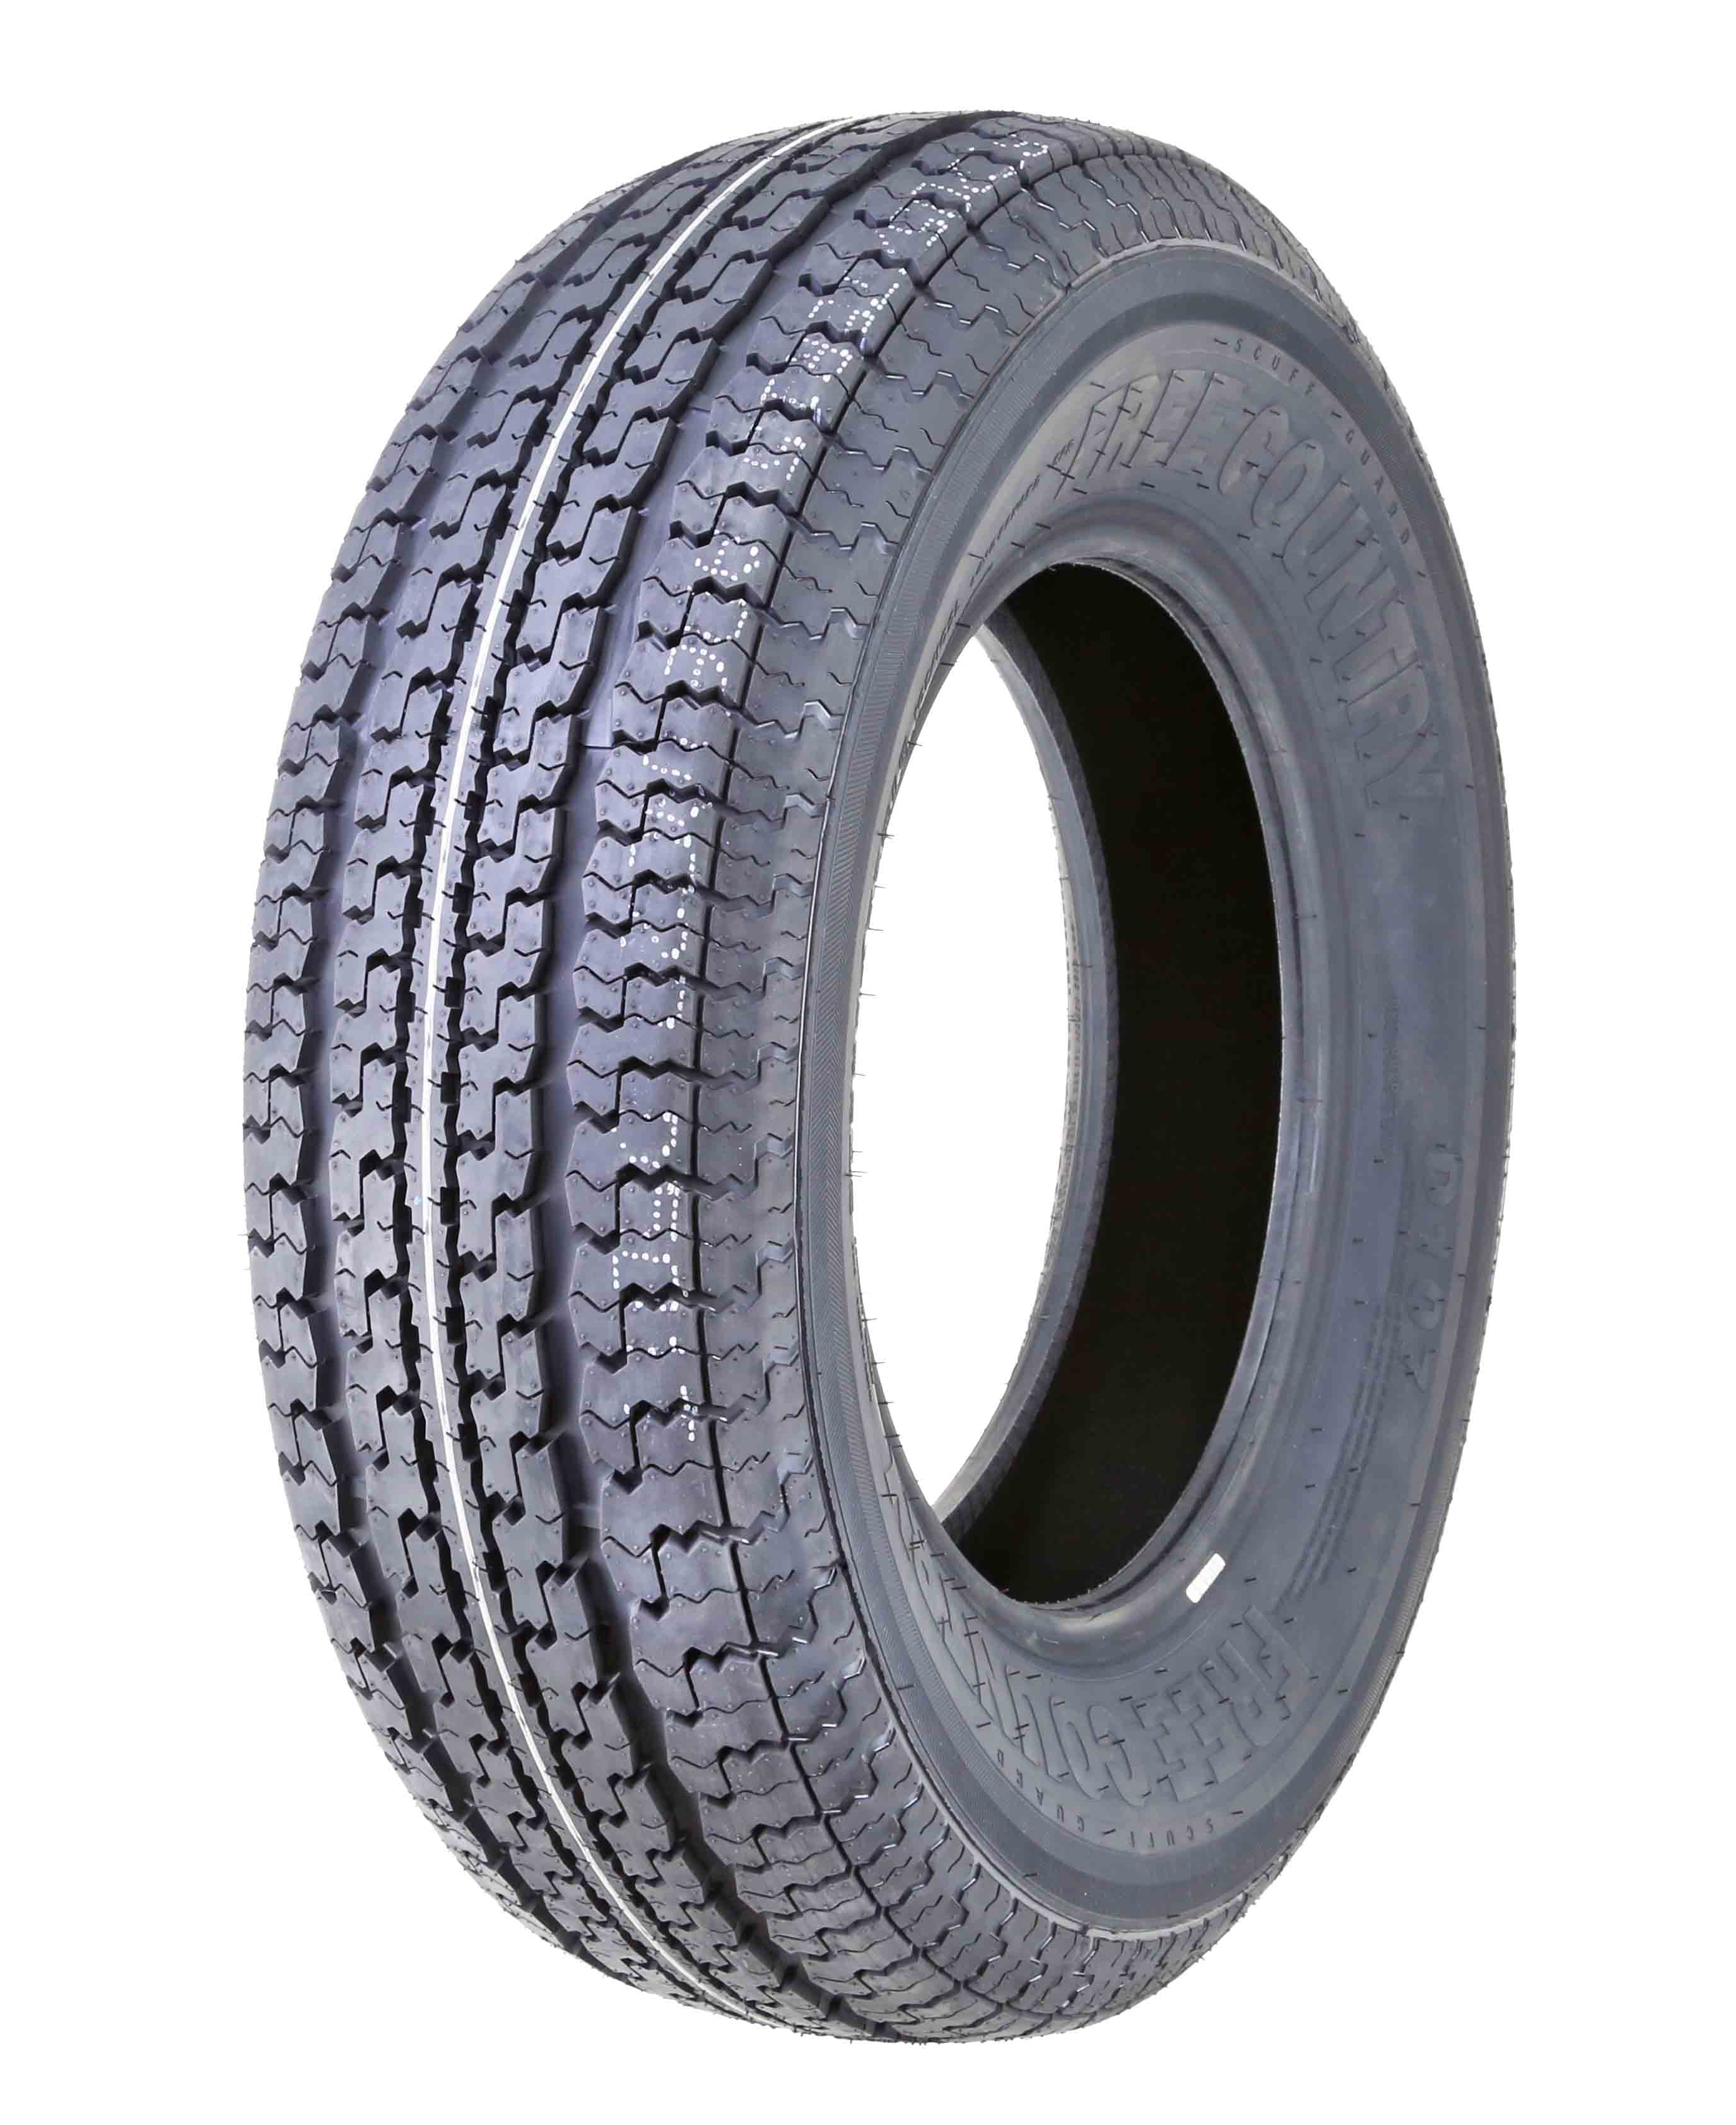 Arrives by Wed, Dec 22 Buy One Premium FREE COUNTRY Trailer Tire ST205 75R1...